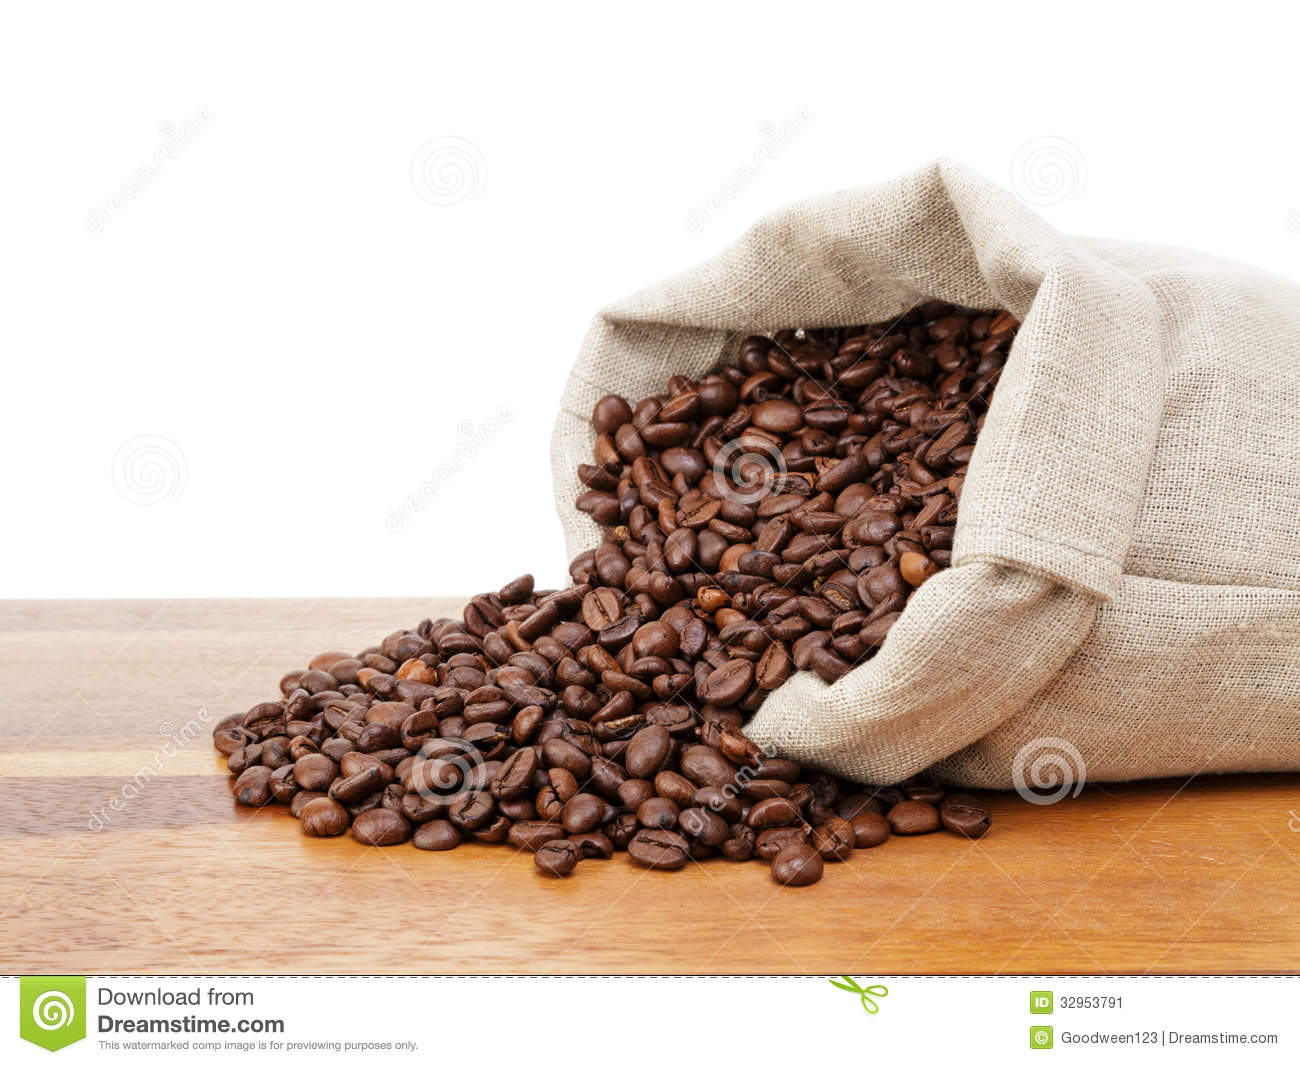 Roated Coffee Beans Spill Out Of The Bag Stock Image   Image  32953791